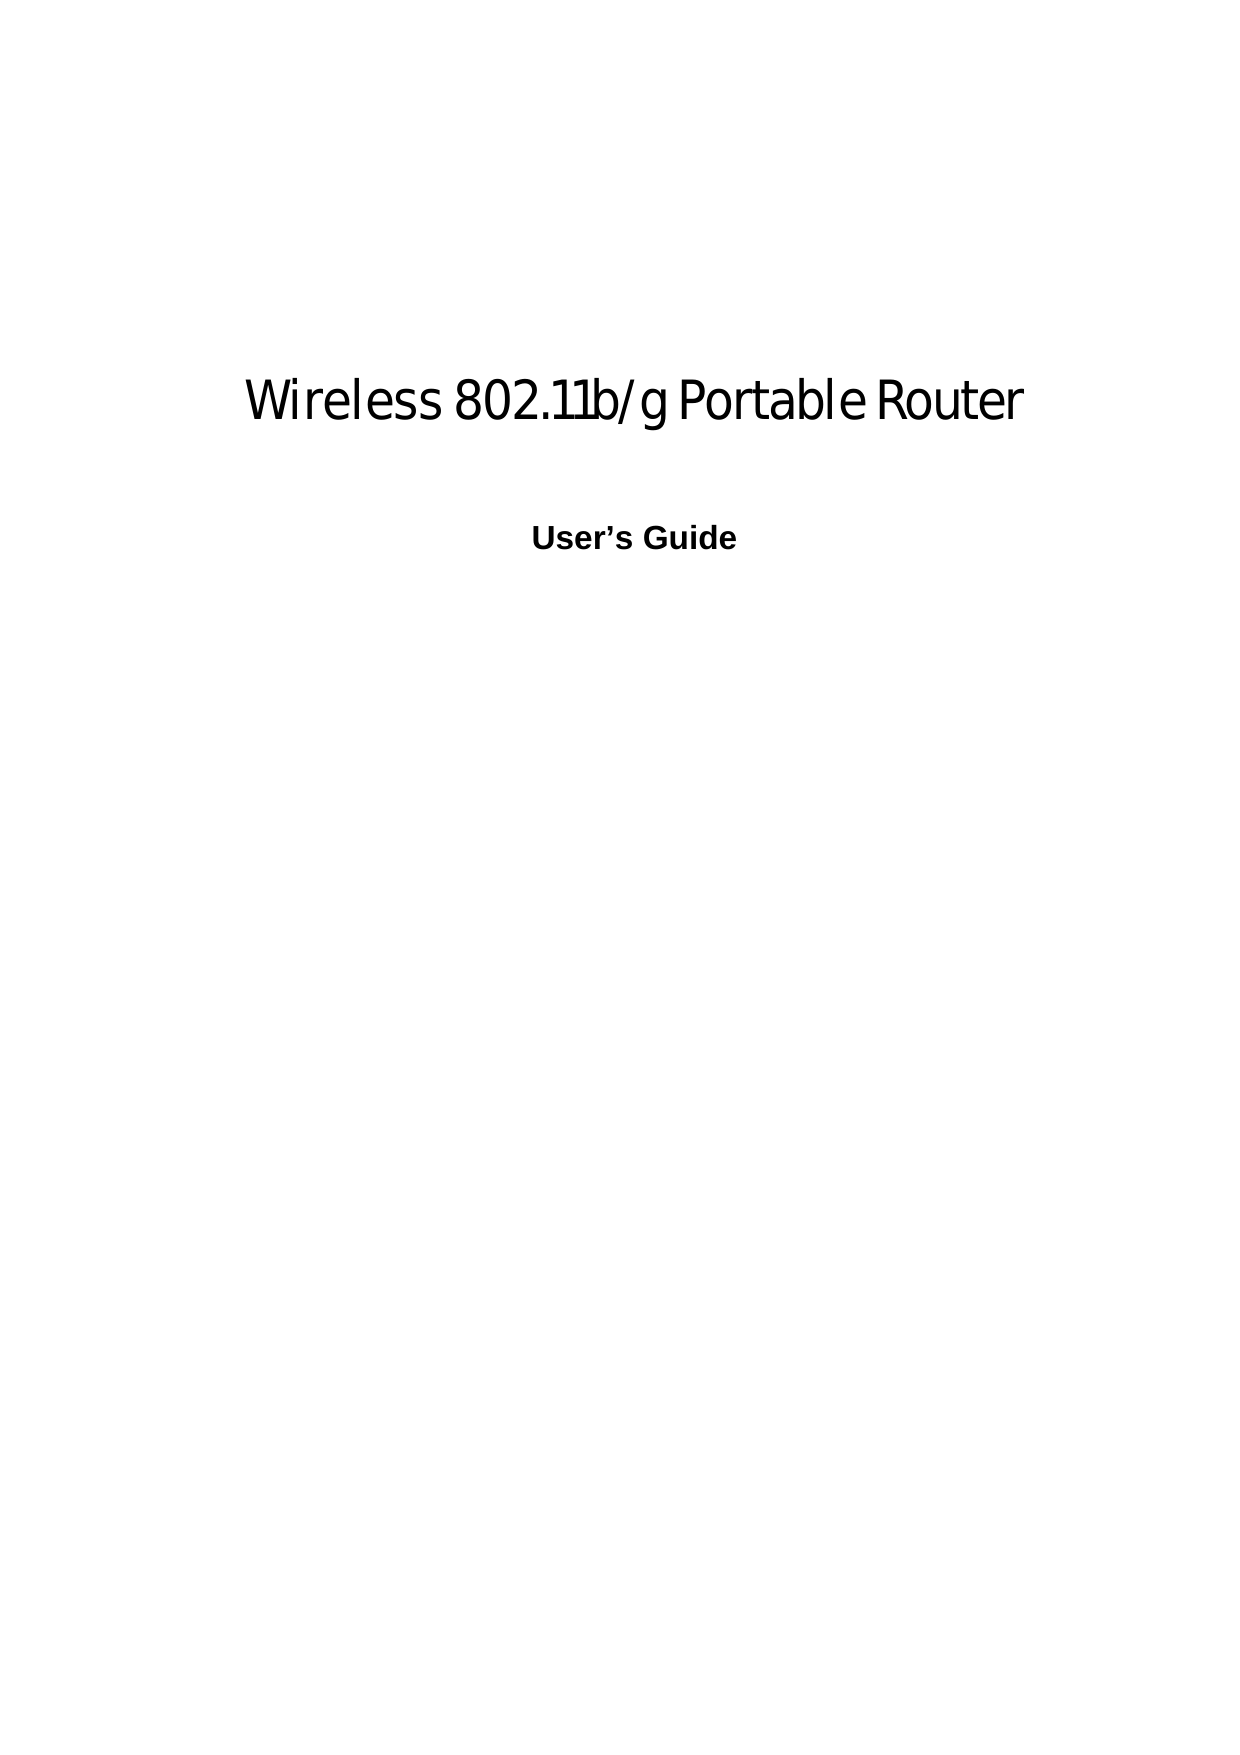        Wireless 802.11b/g Portable Router   User’s Guide  